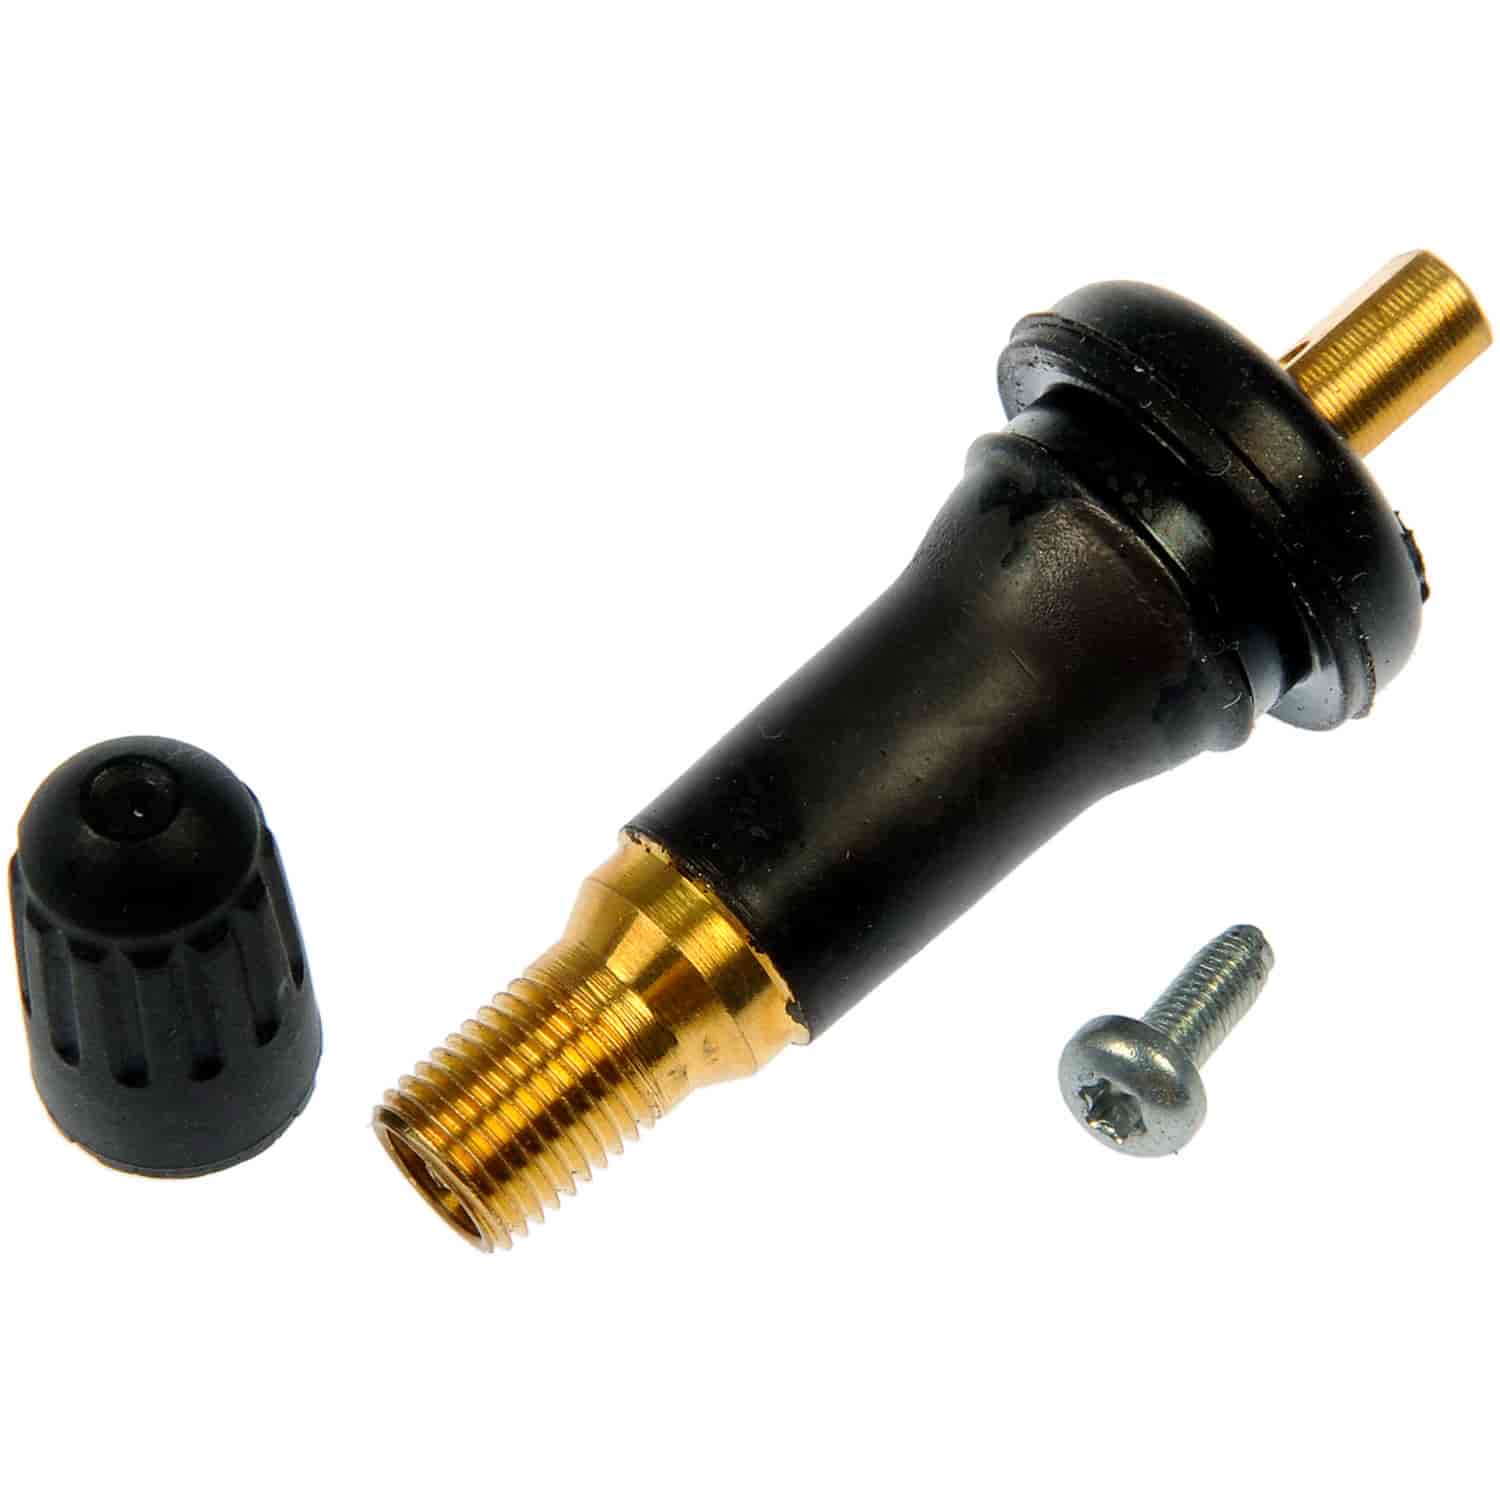 TPMS Service Kit Rubber Snap-In Valve Stem with T-10 Torx Screw